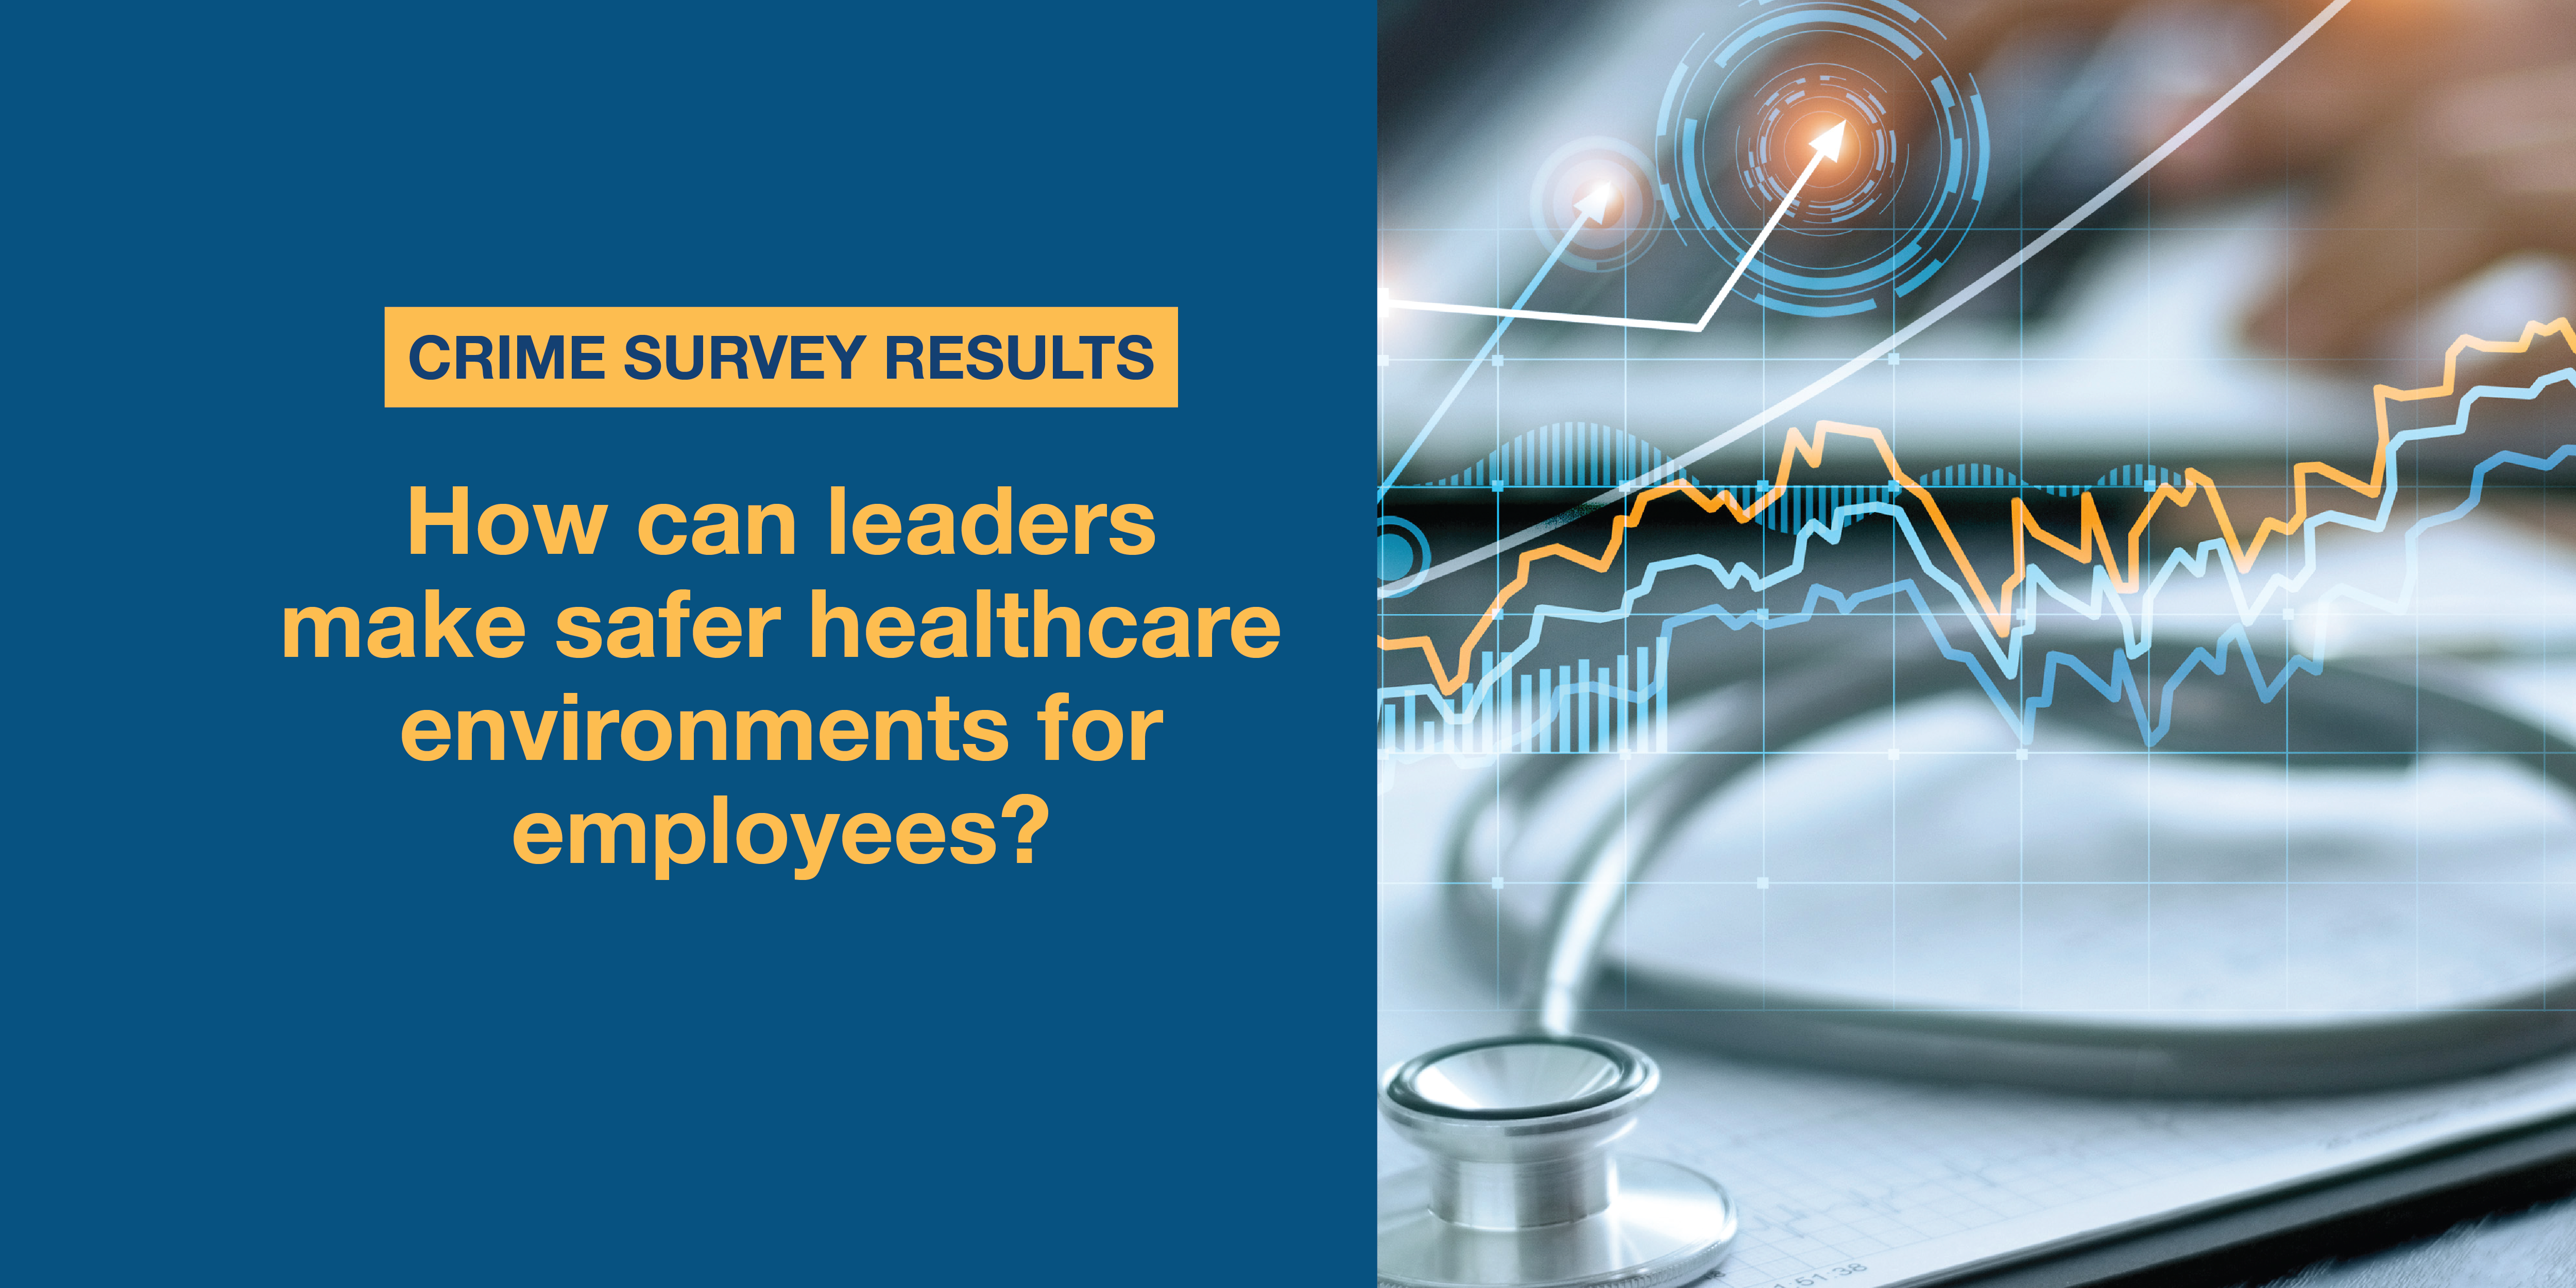 How can leaders make safer healthcare environments for employees?